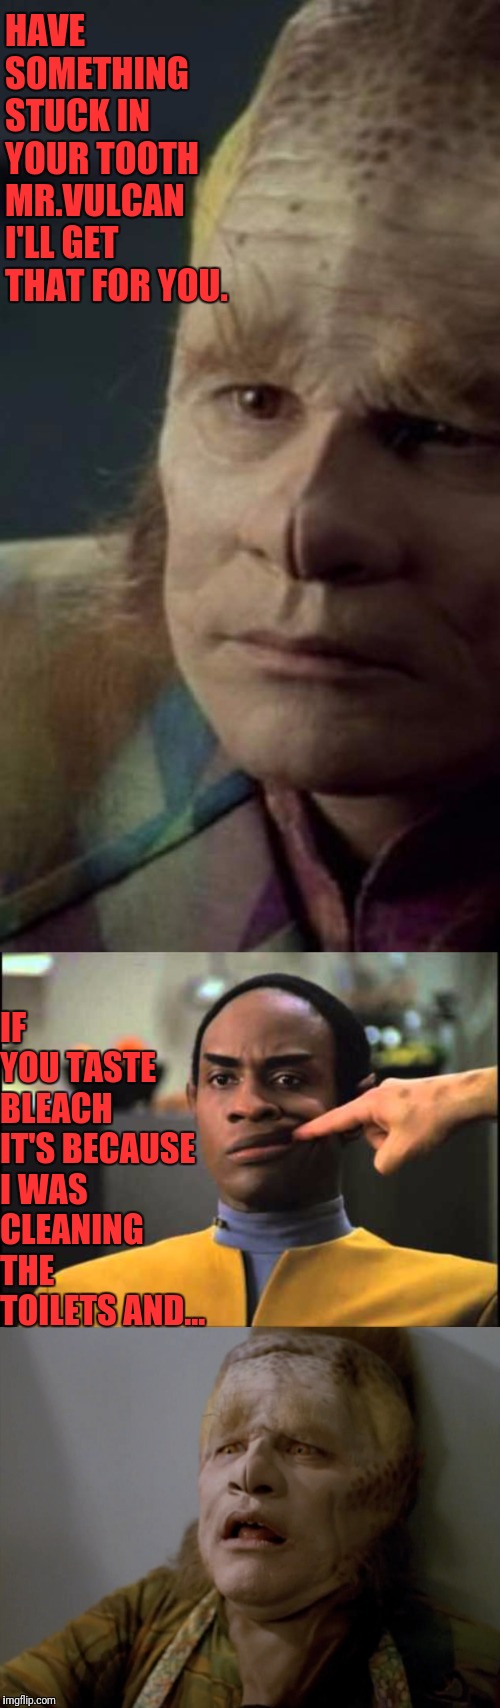 Should Have Happened Years Ago | HAVE SOMETHING STUCK IN YOUR TOOTH MR.VULCAN I'LL GET THAT FOR YOU. IF YOU TASTE BLEACH IT'S BECAUSE I WAS CLEANING THE TOILETS AND... | image tagged in star trek voyager,star trek,choking | made w/ Imgflip meme maker